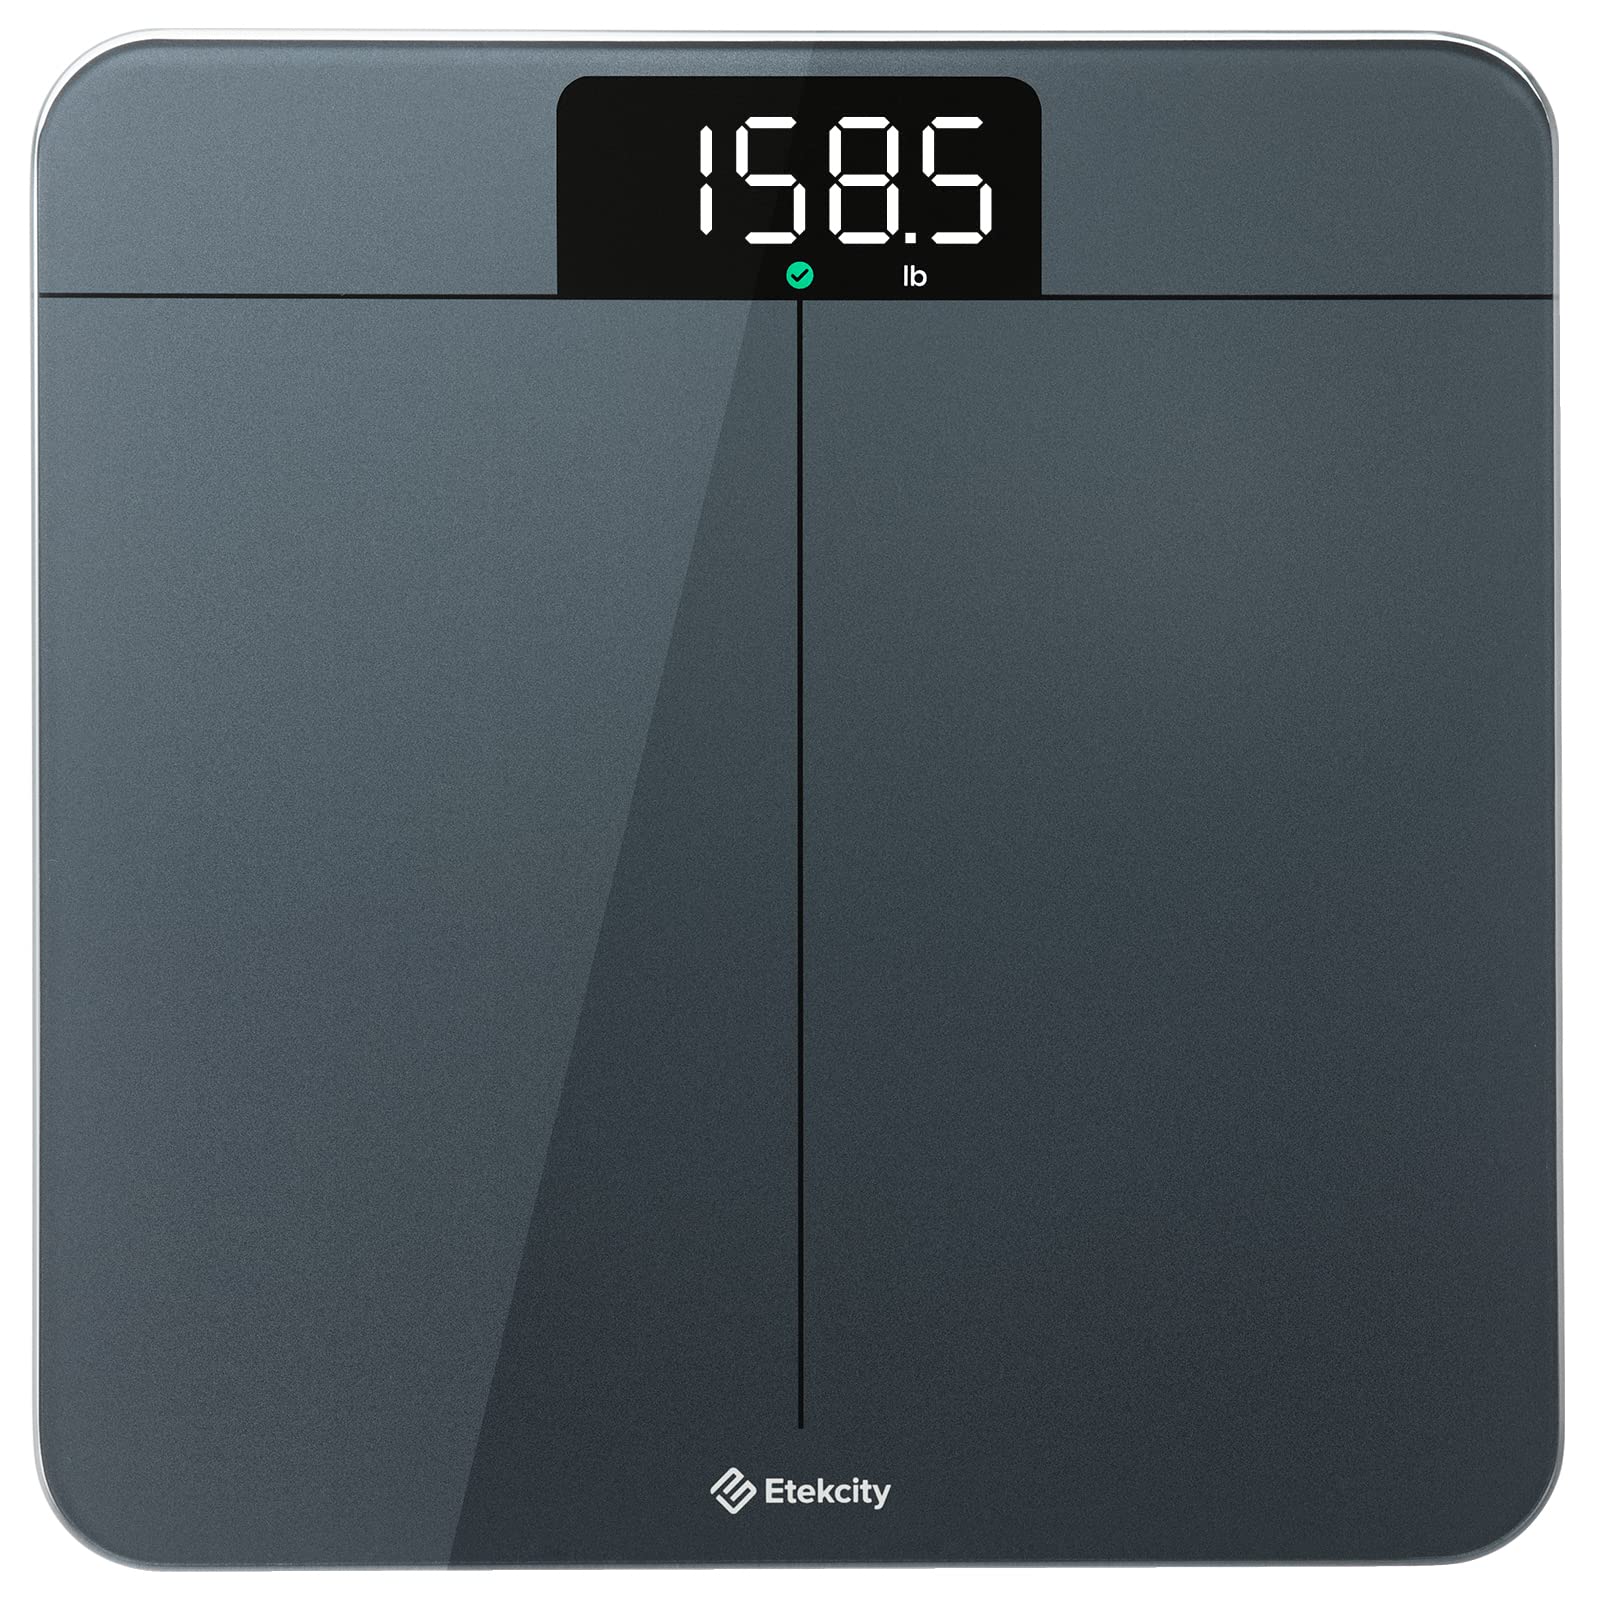 Etekcity Scale for Body Weight